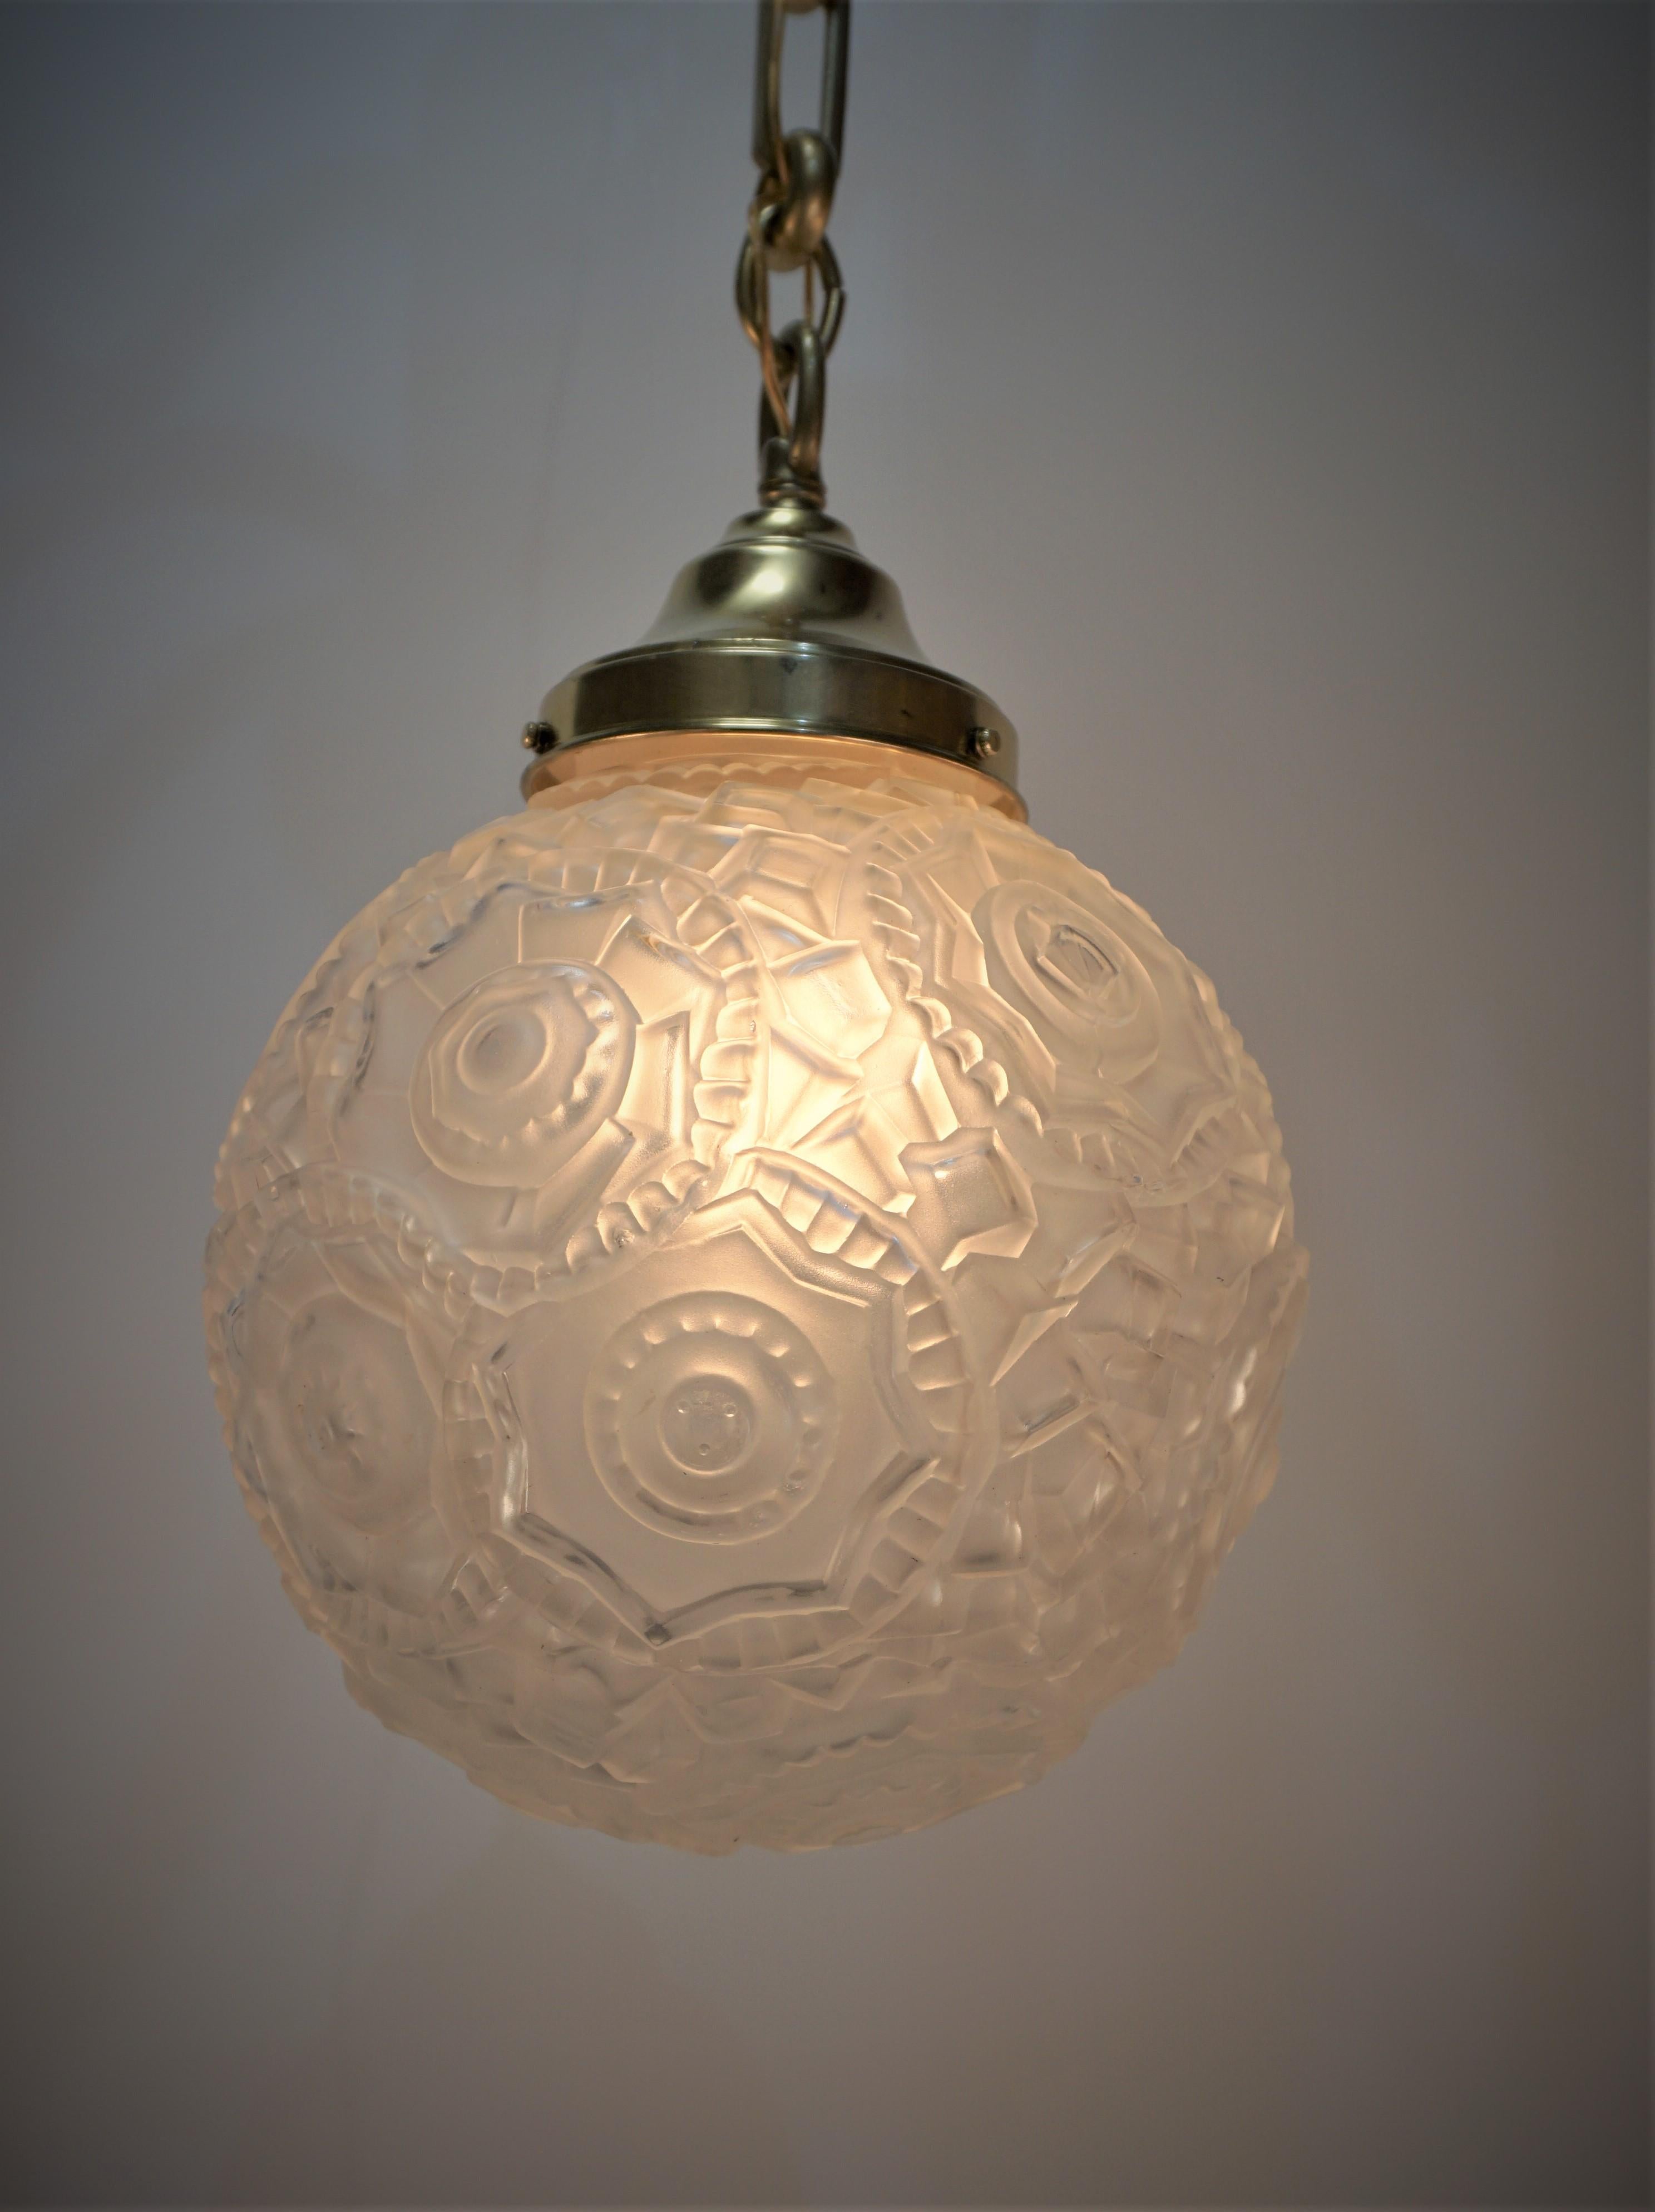 Clear frost glass in geometric design globe with bronze chain and hardware
pendant chandelier.
Professionally rewired and ready for installation. 